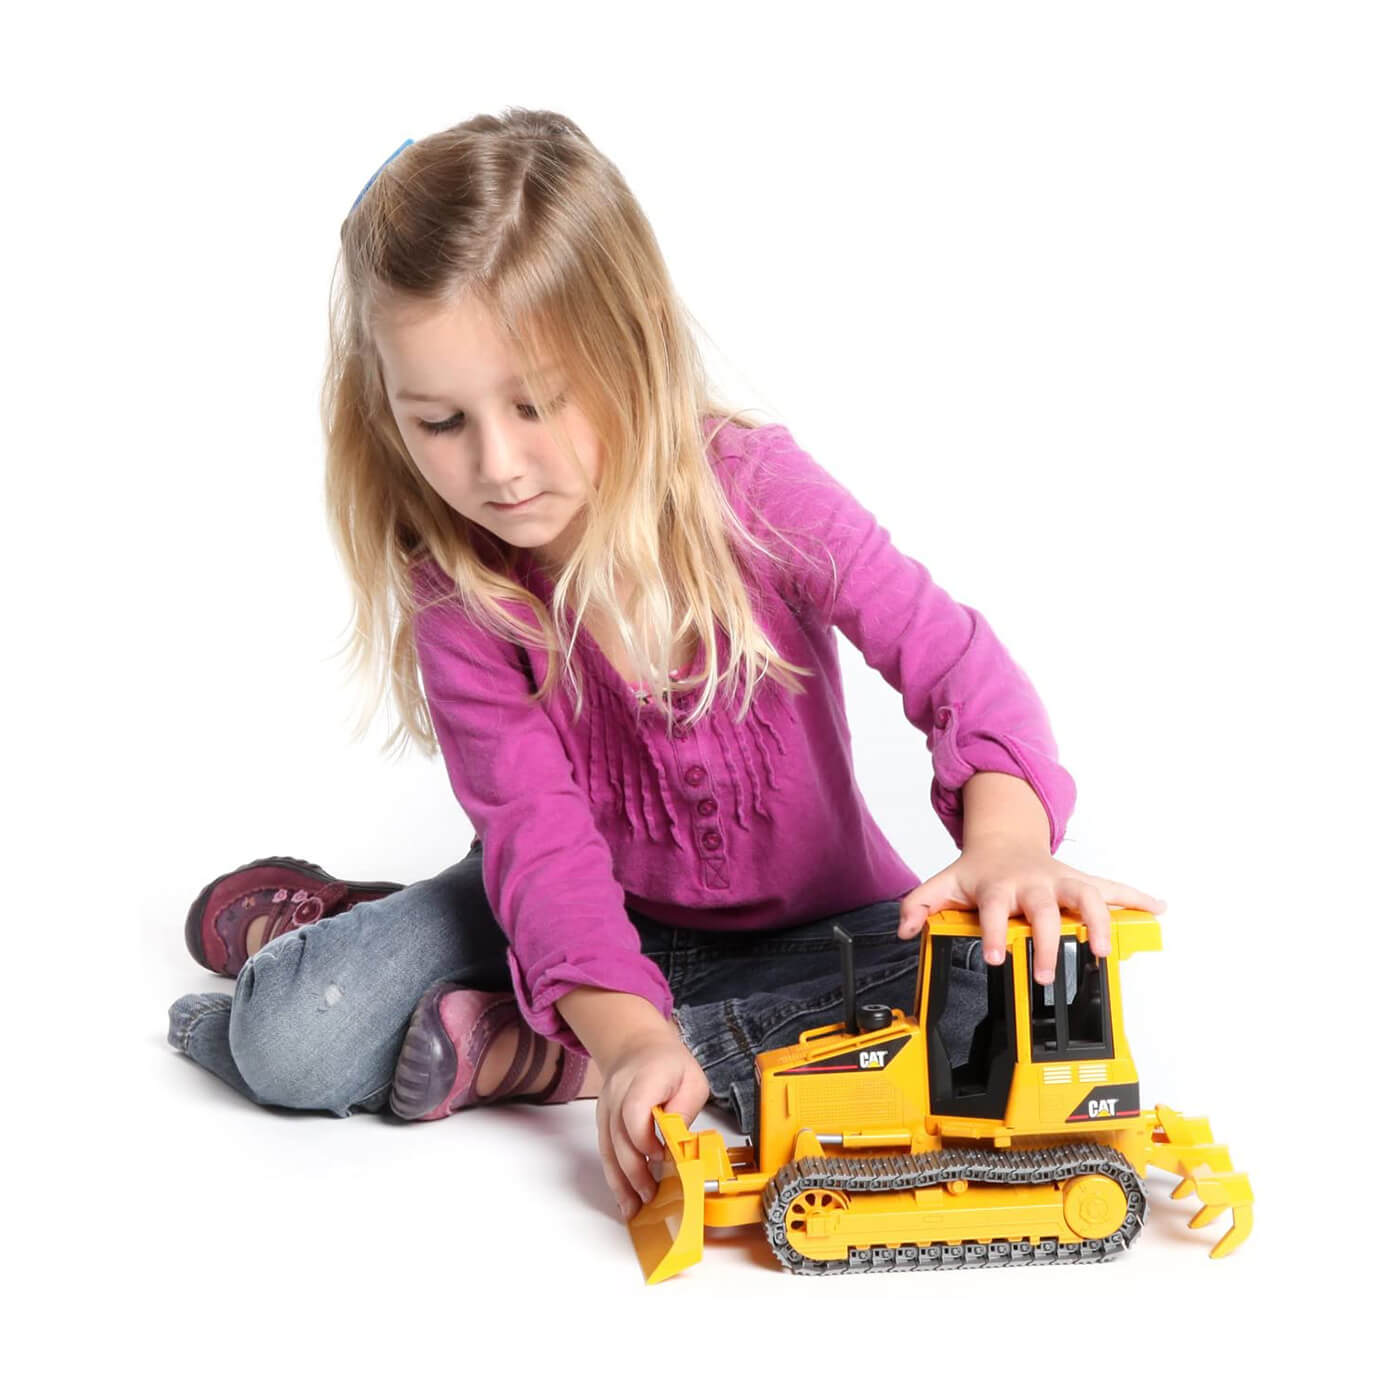 Kid playing with the tractor vehicle toy.